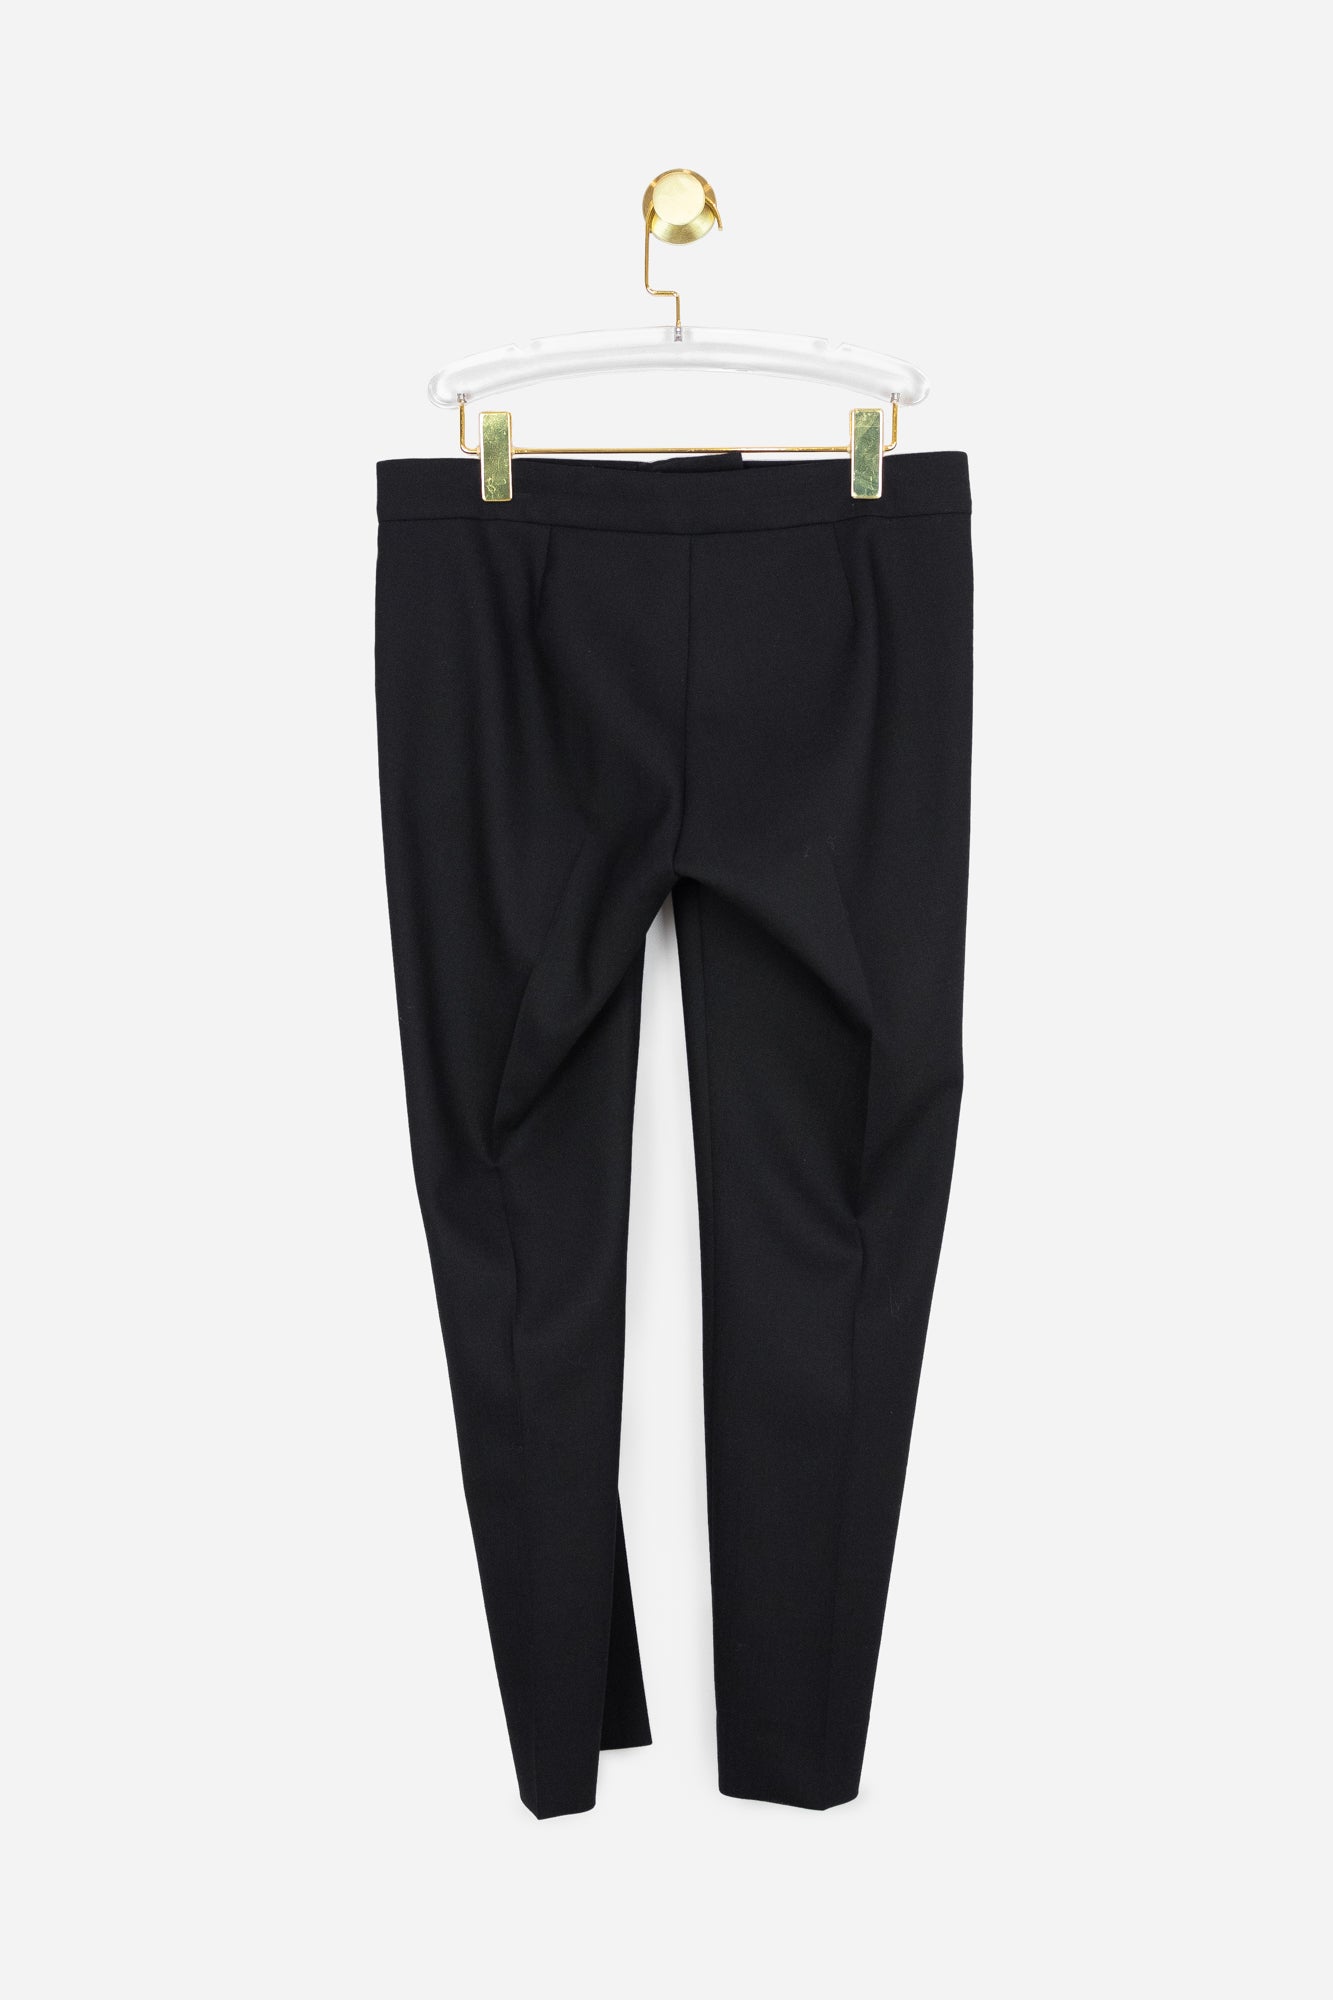 Black Slim Tailored Trousers - So Over It Luxury Consignment